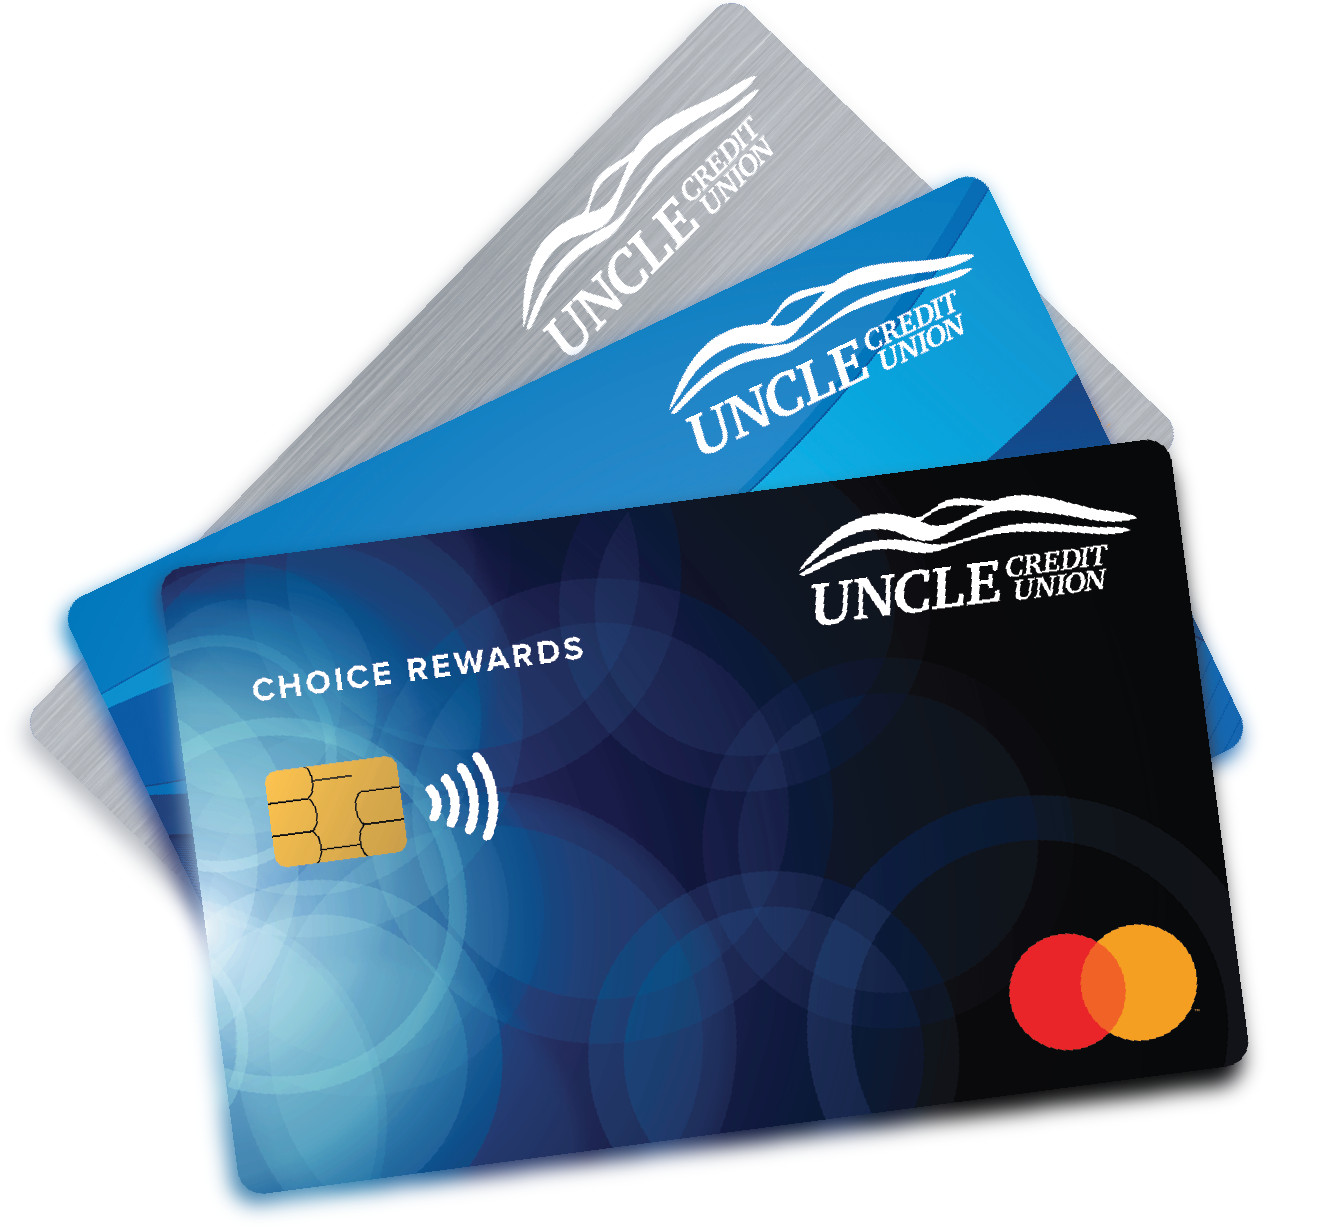 UNCLE Card Images Stacked